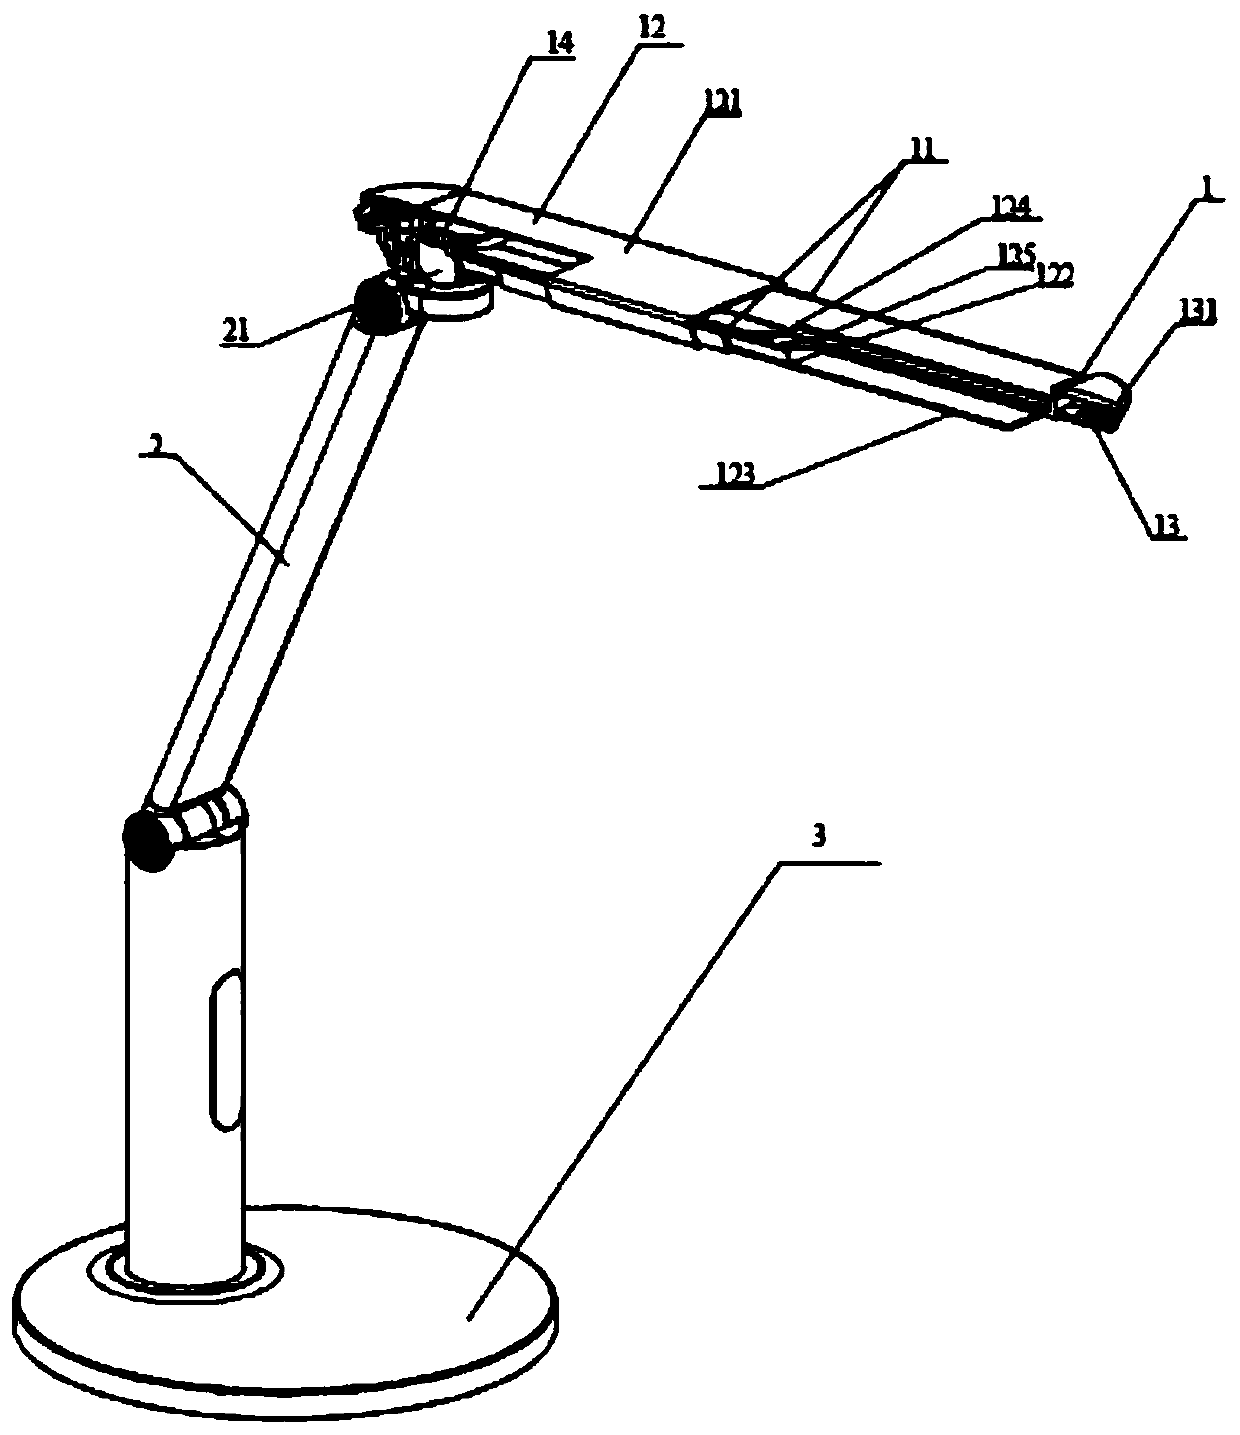 Long-strip-shaped table lamp with side light emitting and light uniformizing device